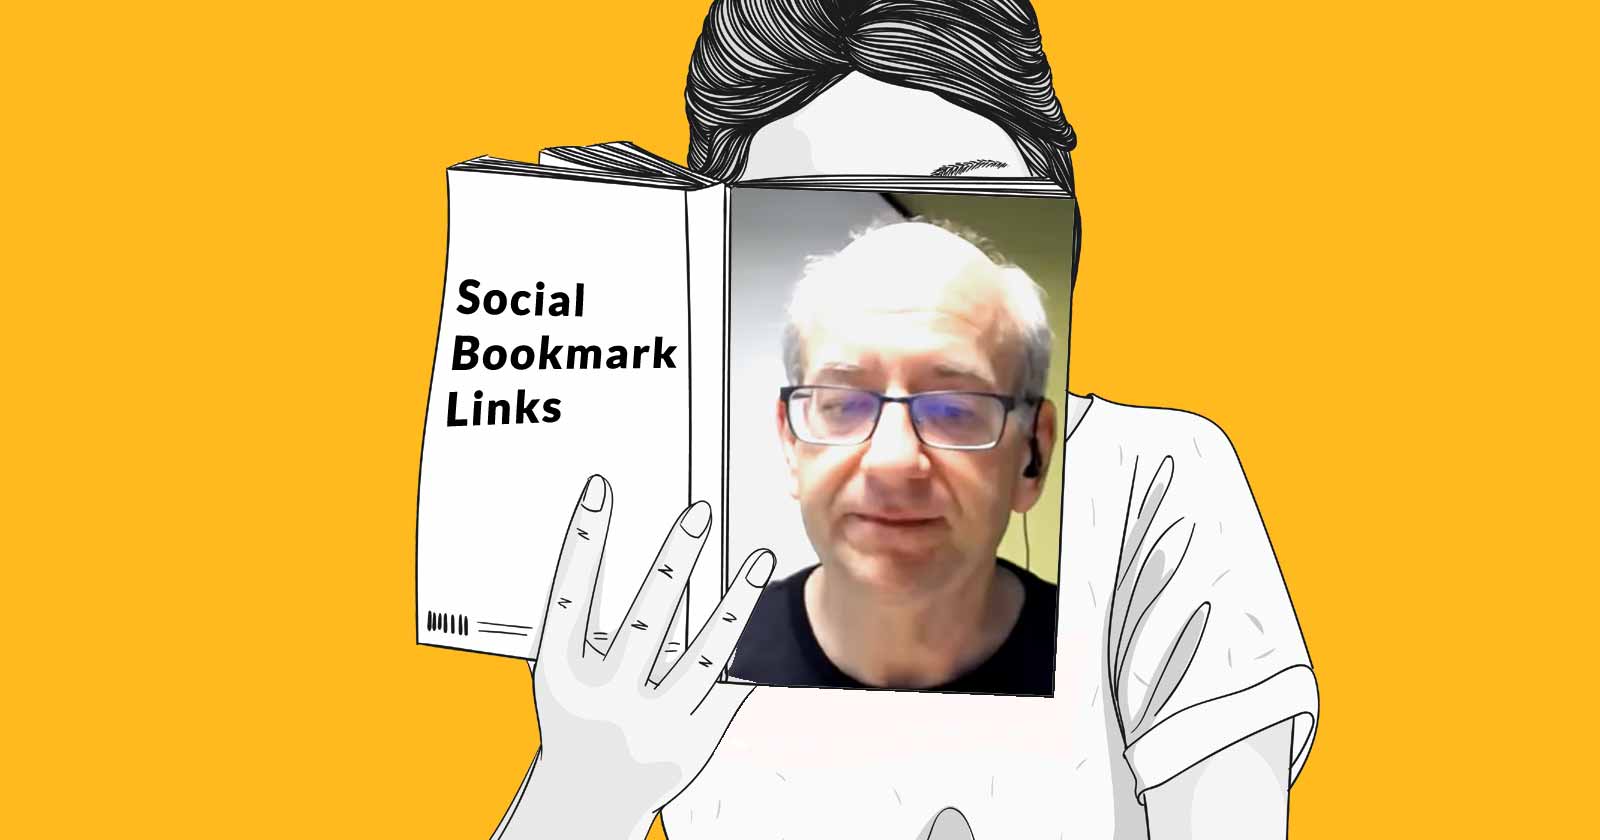 Image of Google's John Mueller with the words Social Bookmark Links